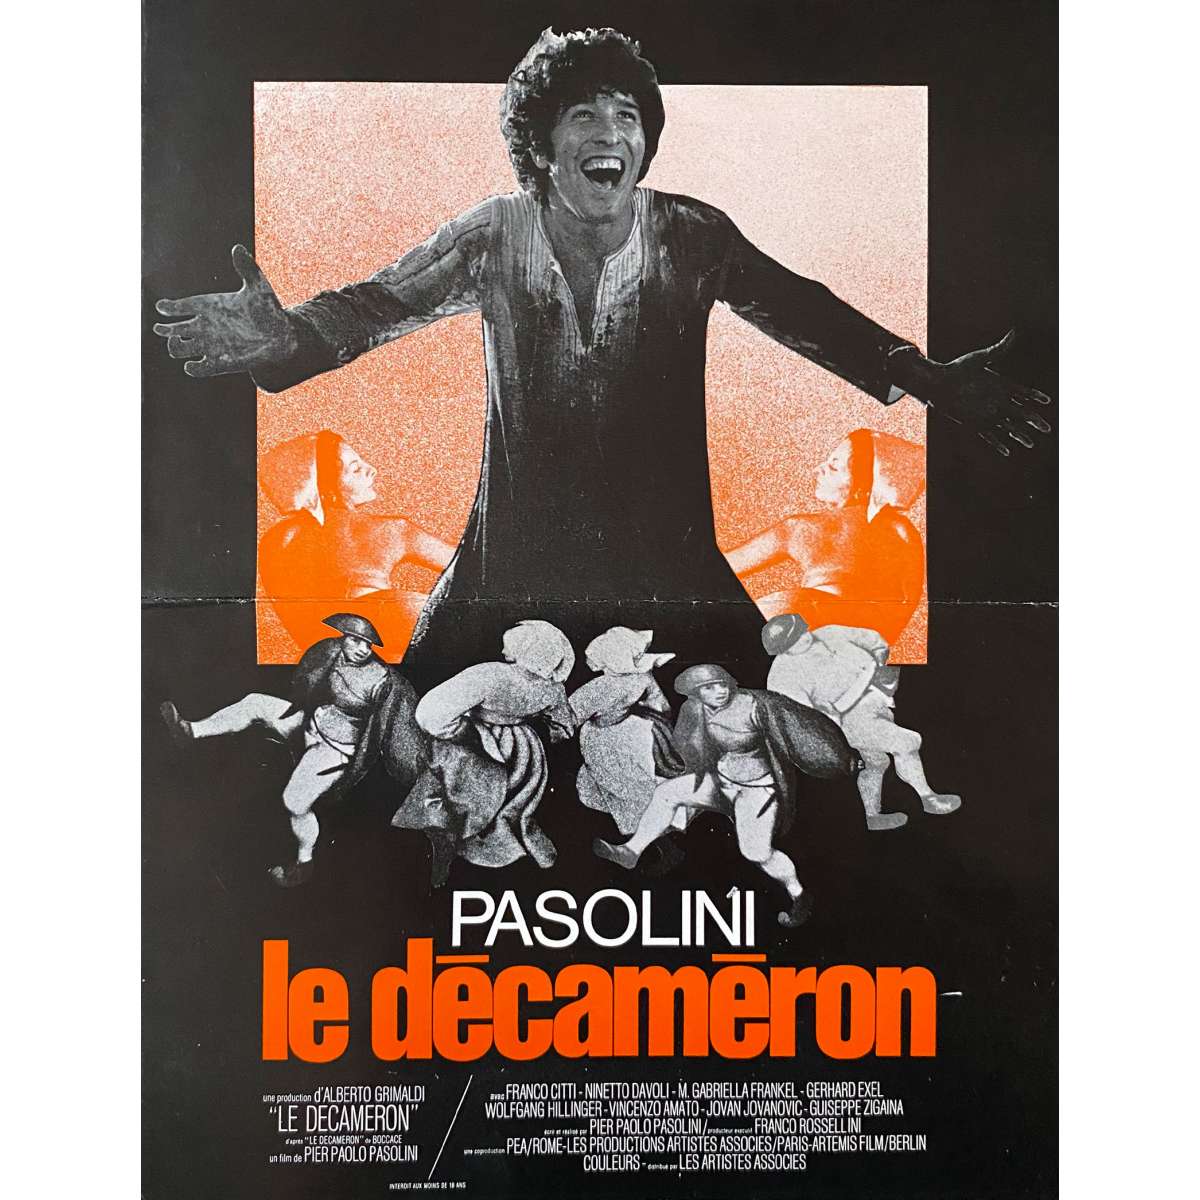 THE DECAMERON French Herald - 9x12 in. - 1971